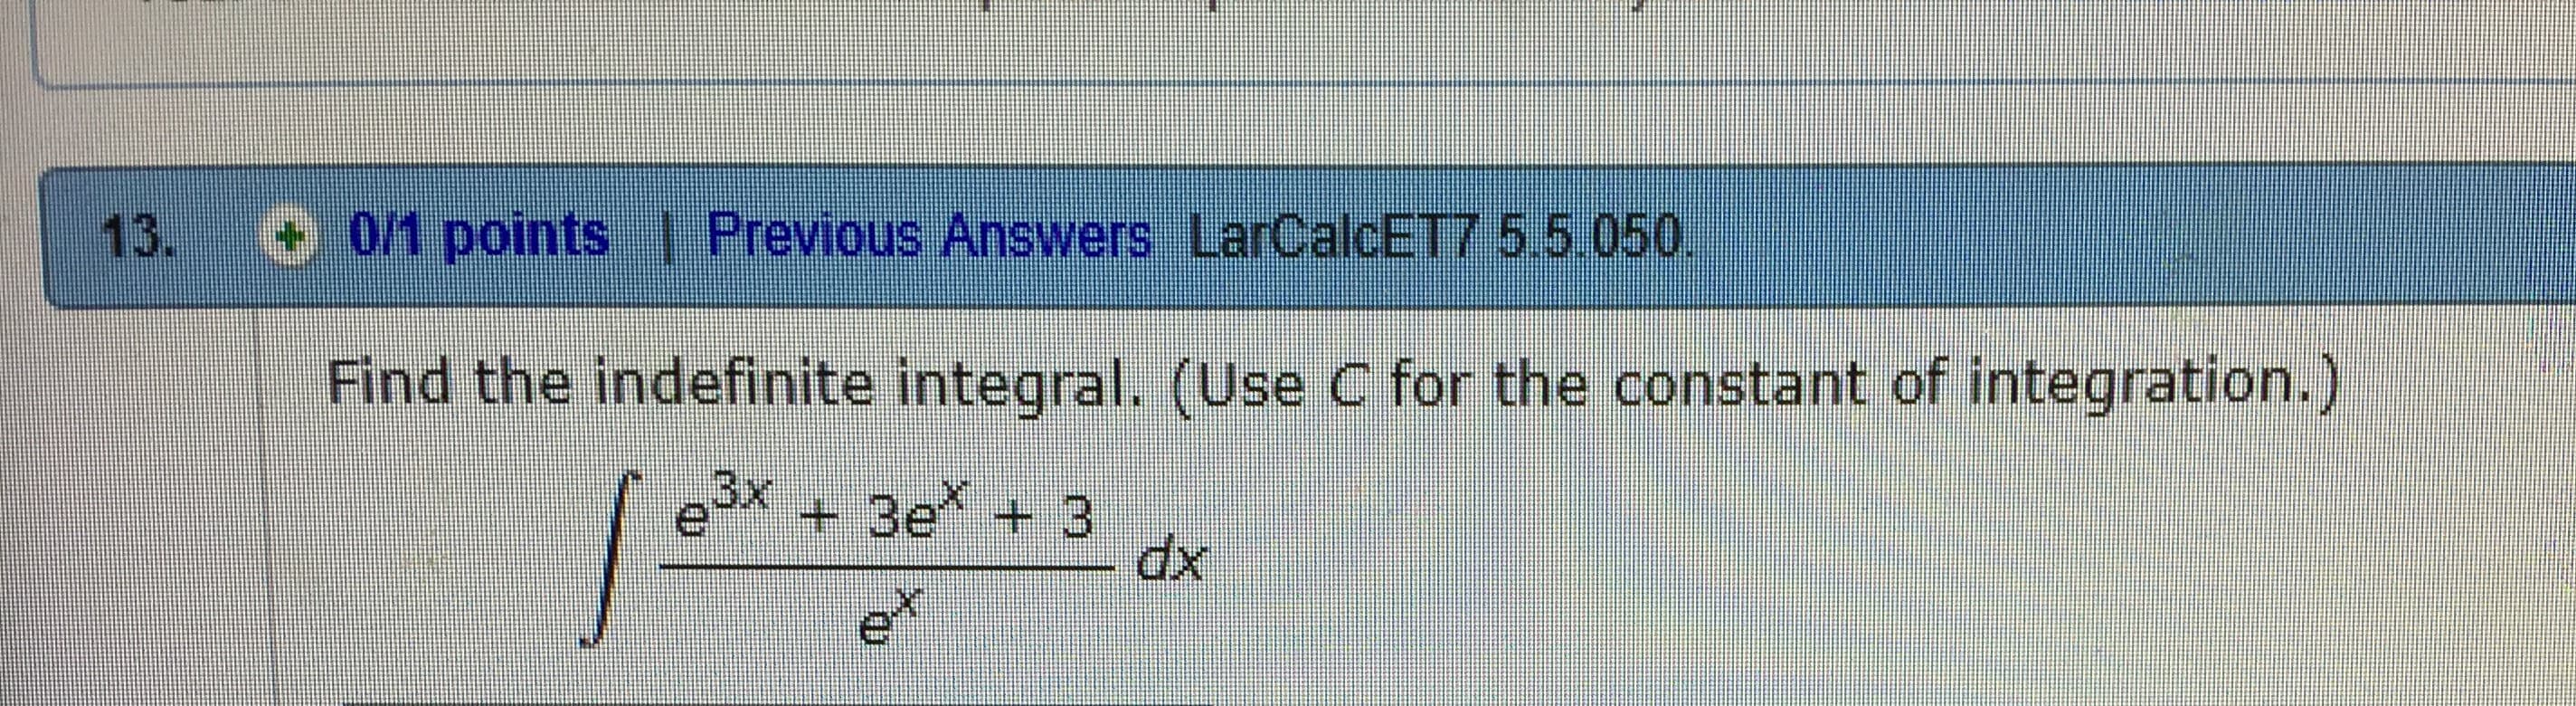 13. O 01 points | Previous Answers LarCalcE T7 5.5.050.
Find the indefinite integral. (Use C for the constant of integration.)
e3x3e 3
dx
